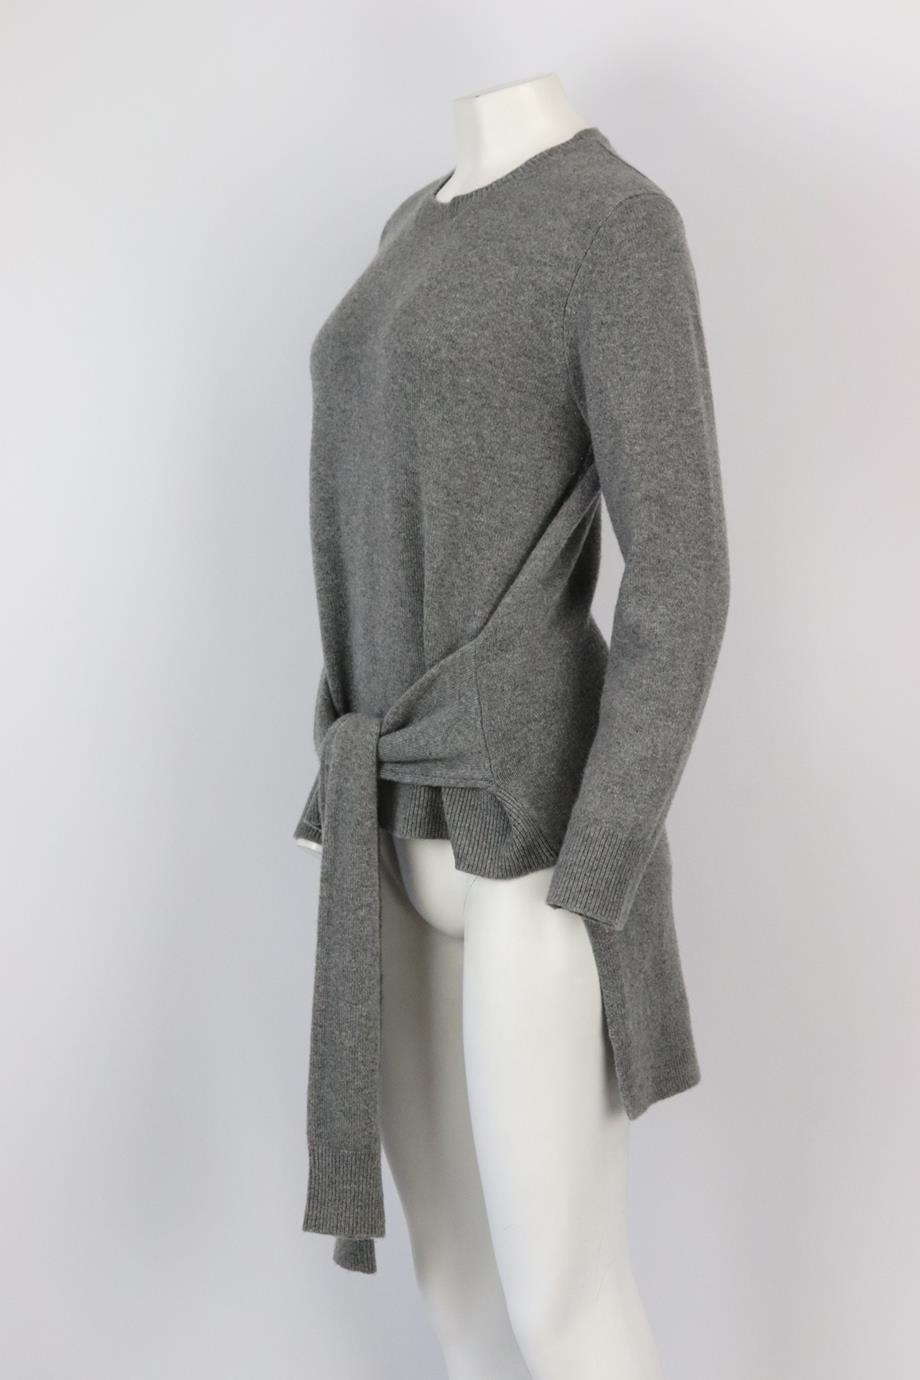 MICHAEL KORS COLLECTION TIE FRONT CASHMERE SWEATER SMALL